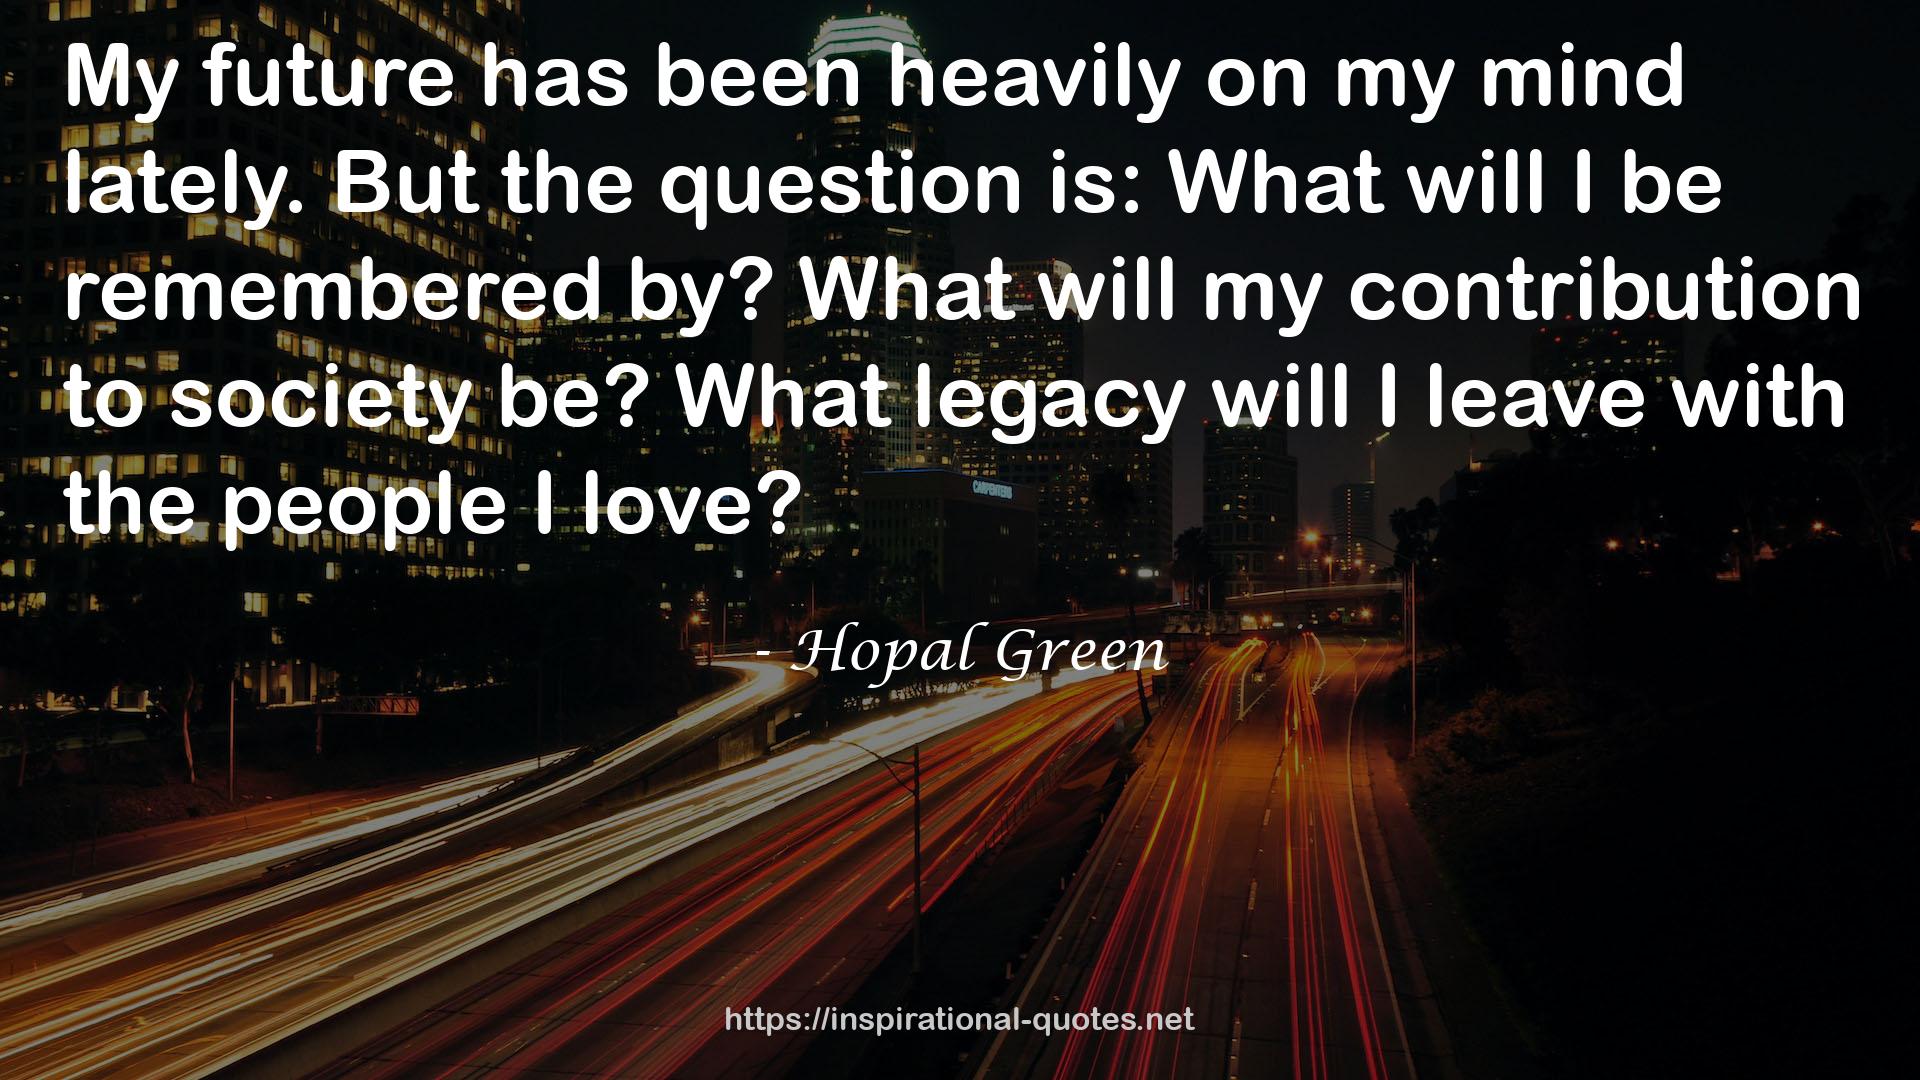 Hopal Green QUOTES